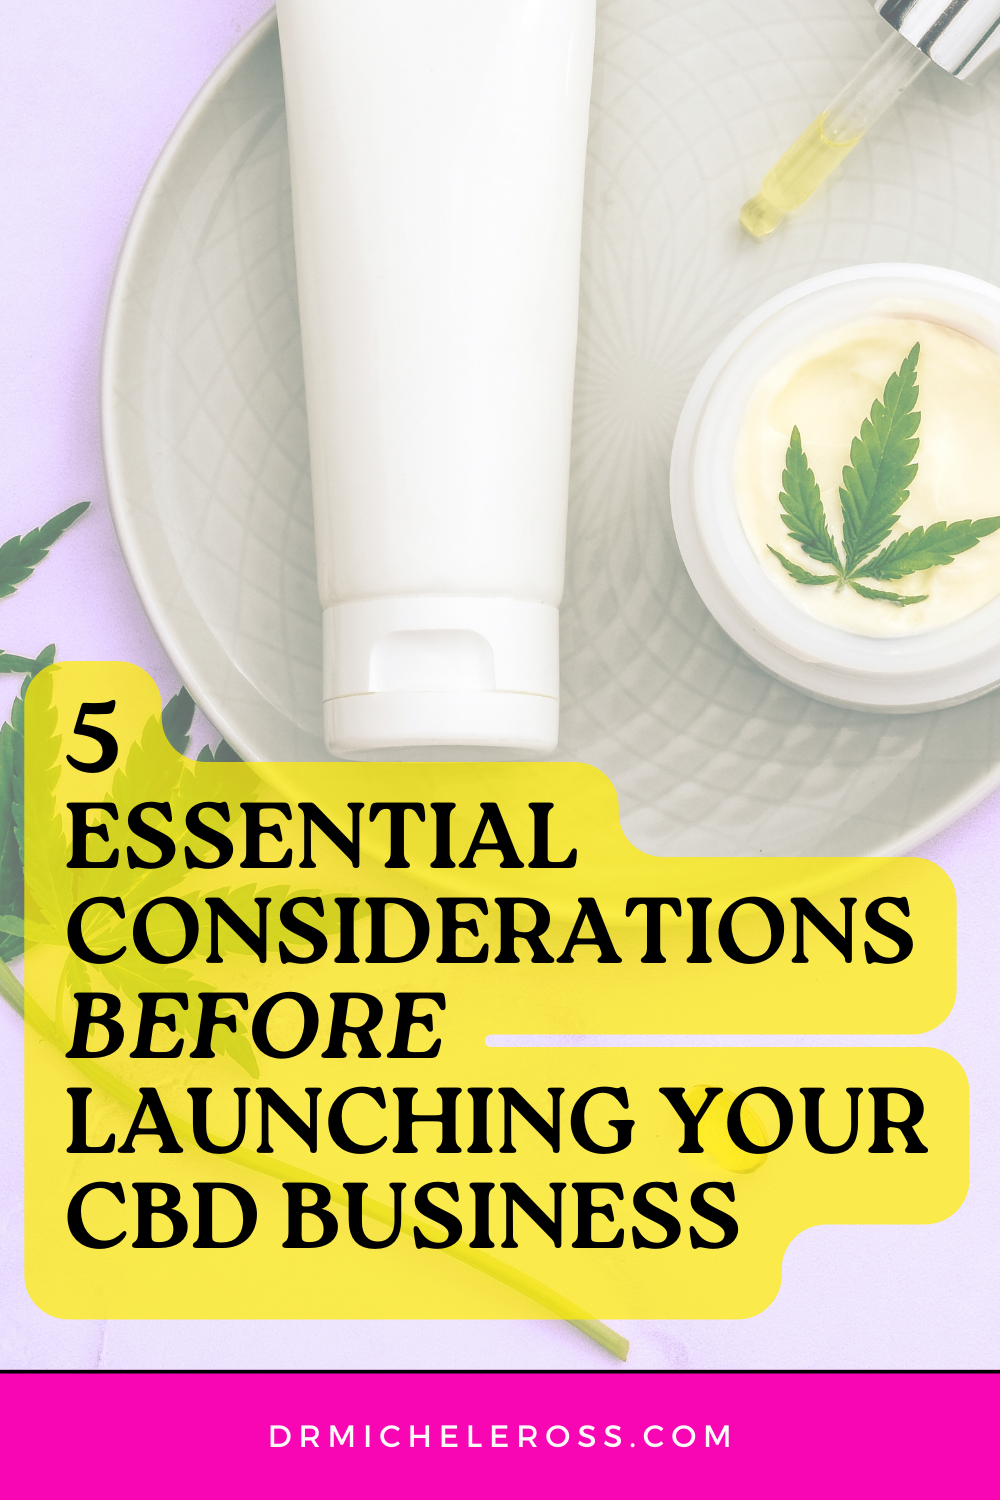 5 Essential Considerations Before Launching Your CBD Business Pinterest Pin